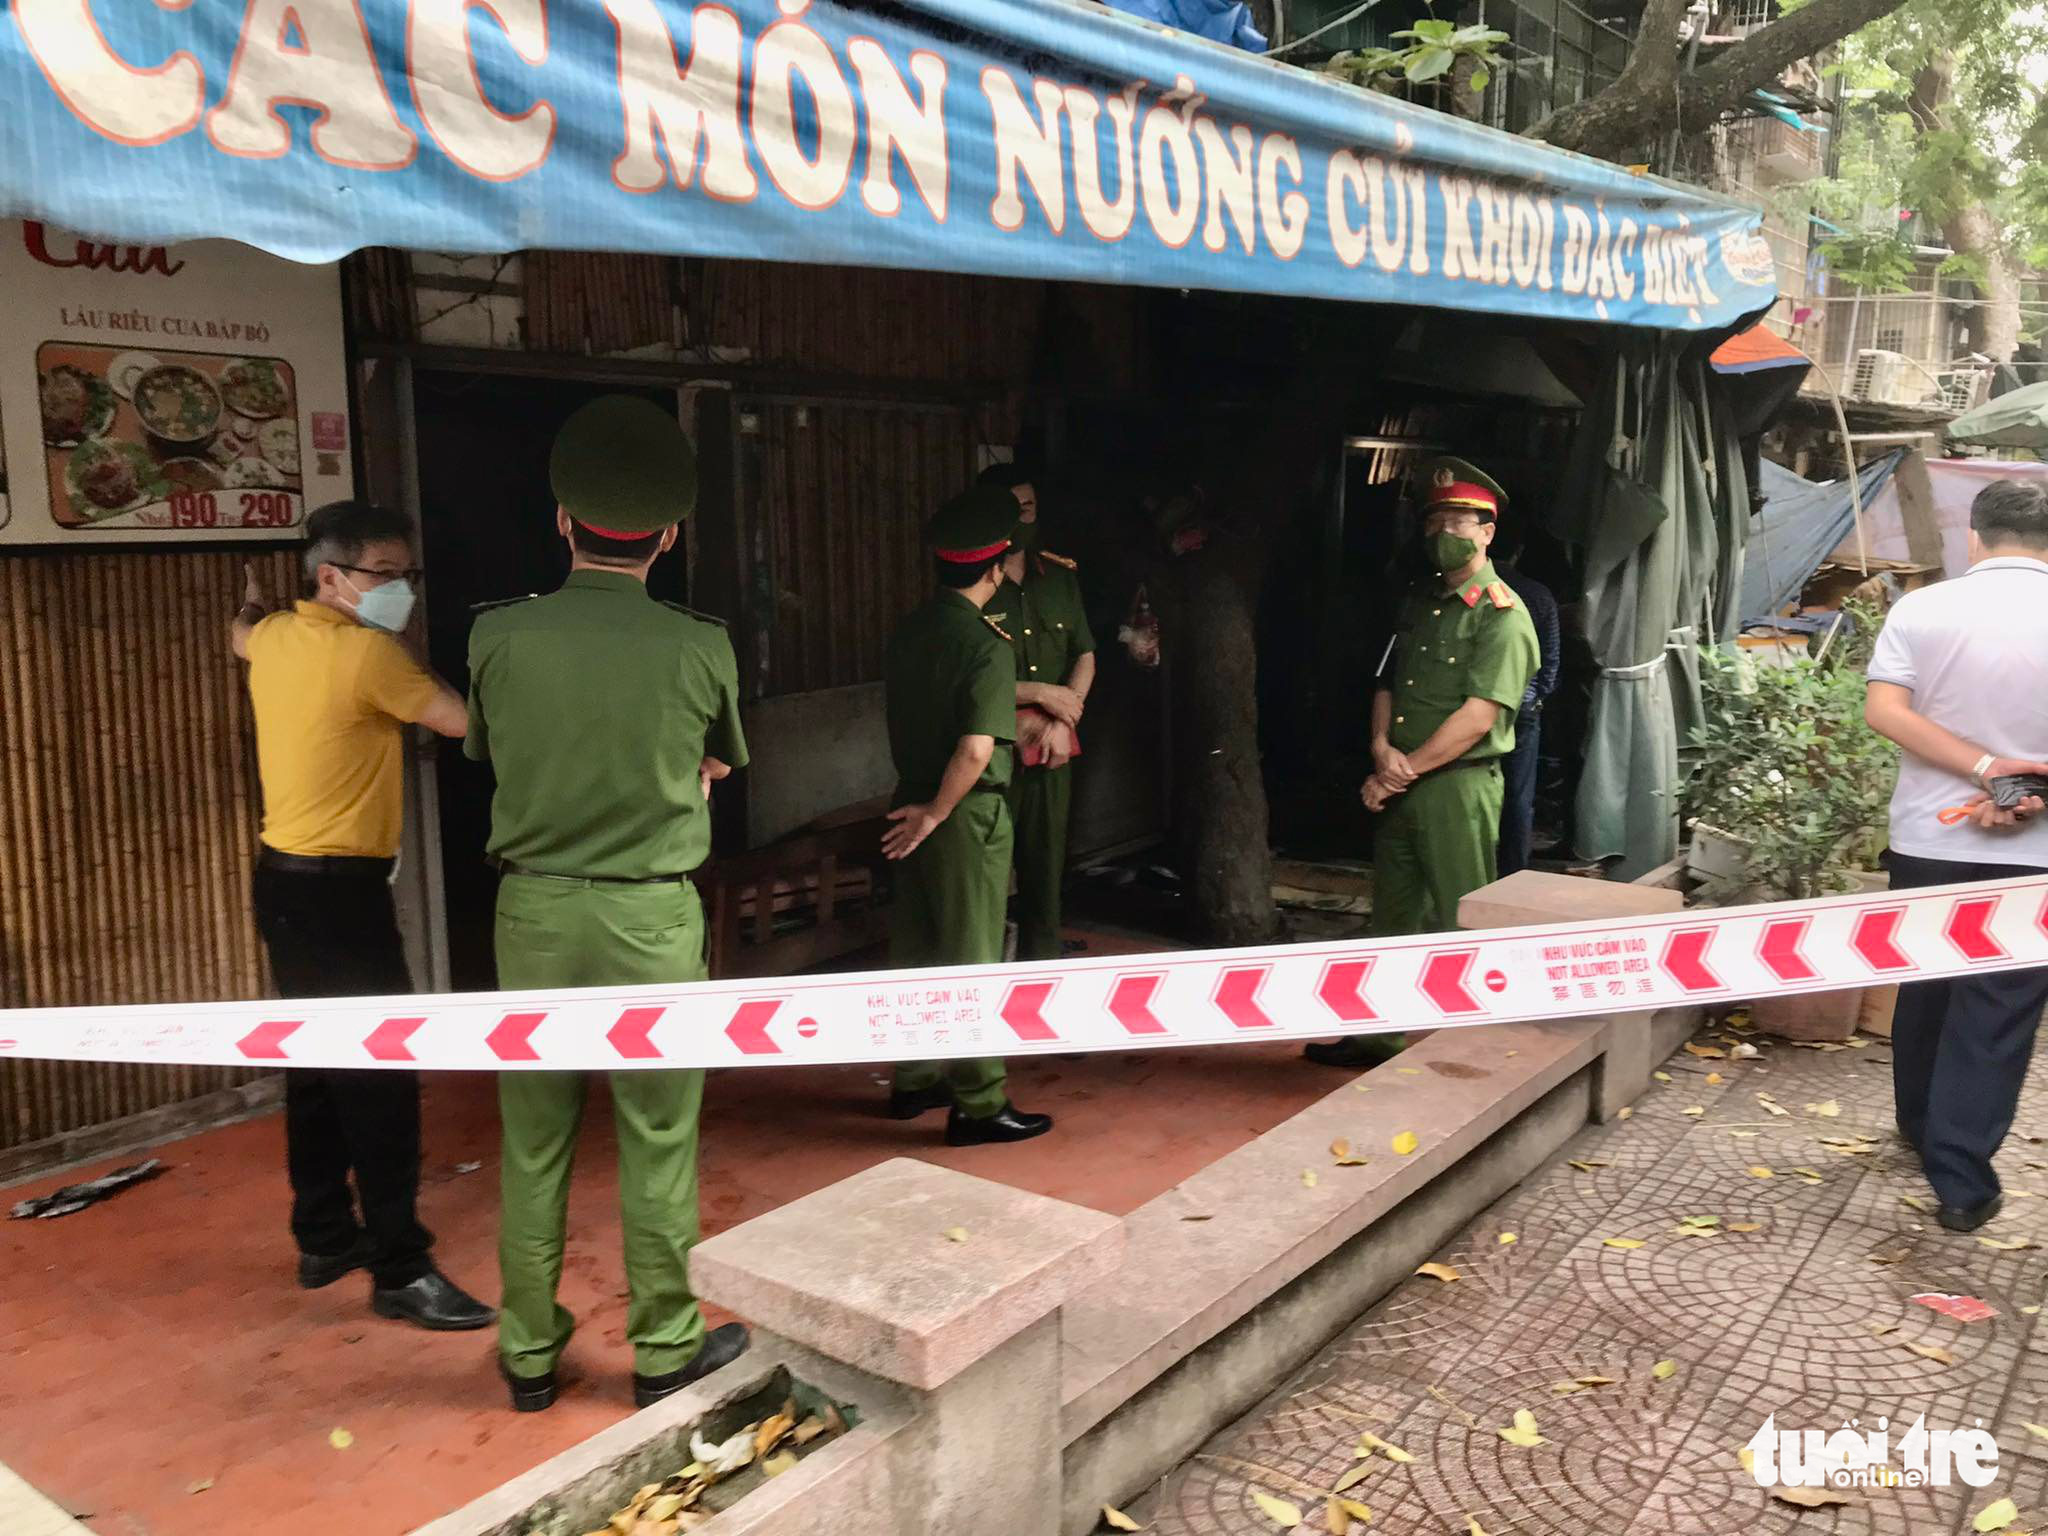 Police officers work at the scene of a house fire on Pham Ngoc Thach Street in Dong Da District, Hanoi, April 21, 2022. Photo: Chi Tue / Tuoi Tre